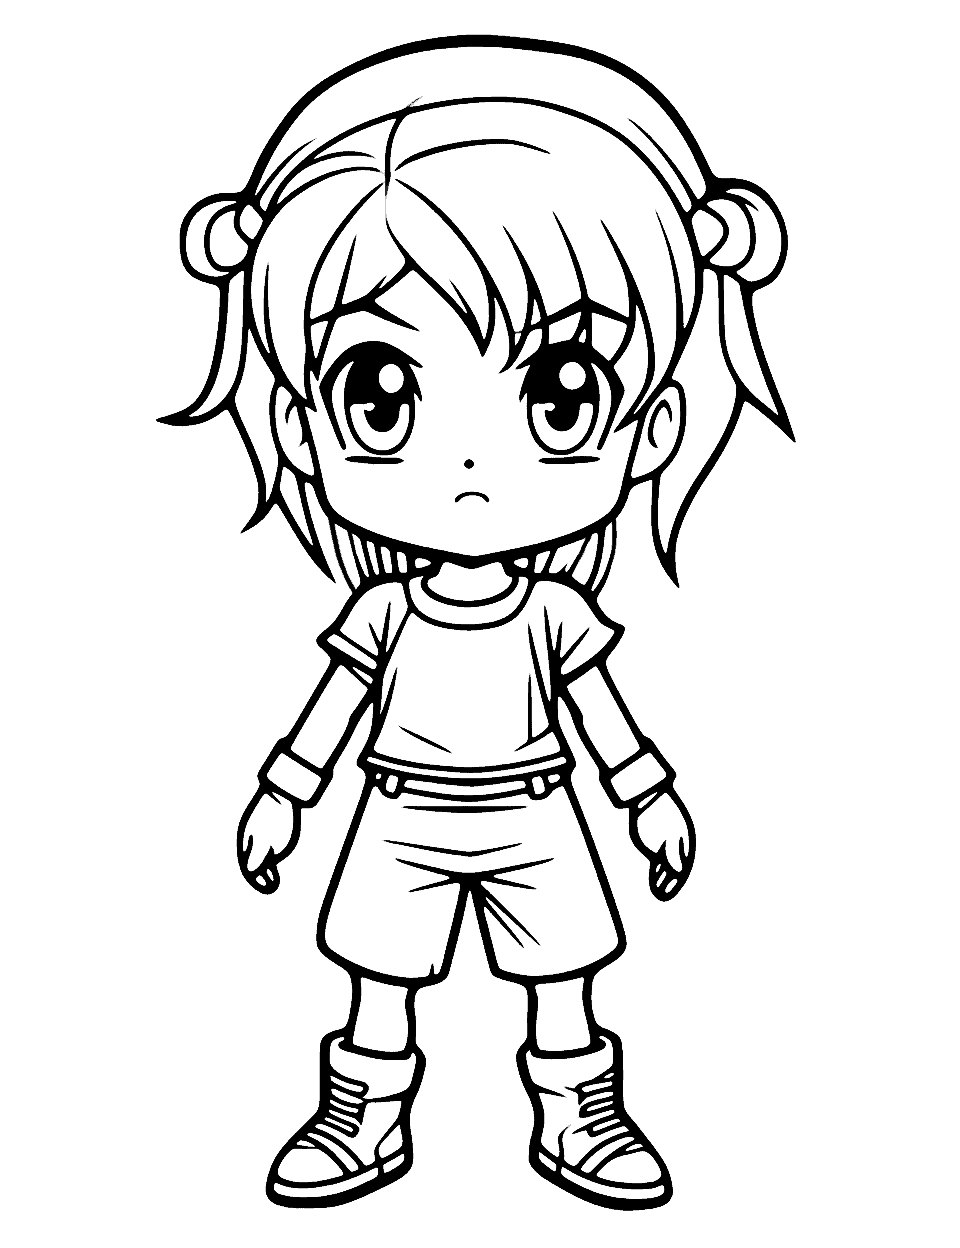 chibi anime characters coloring pages